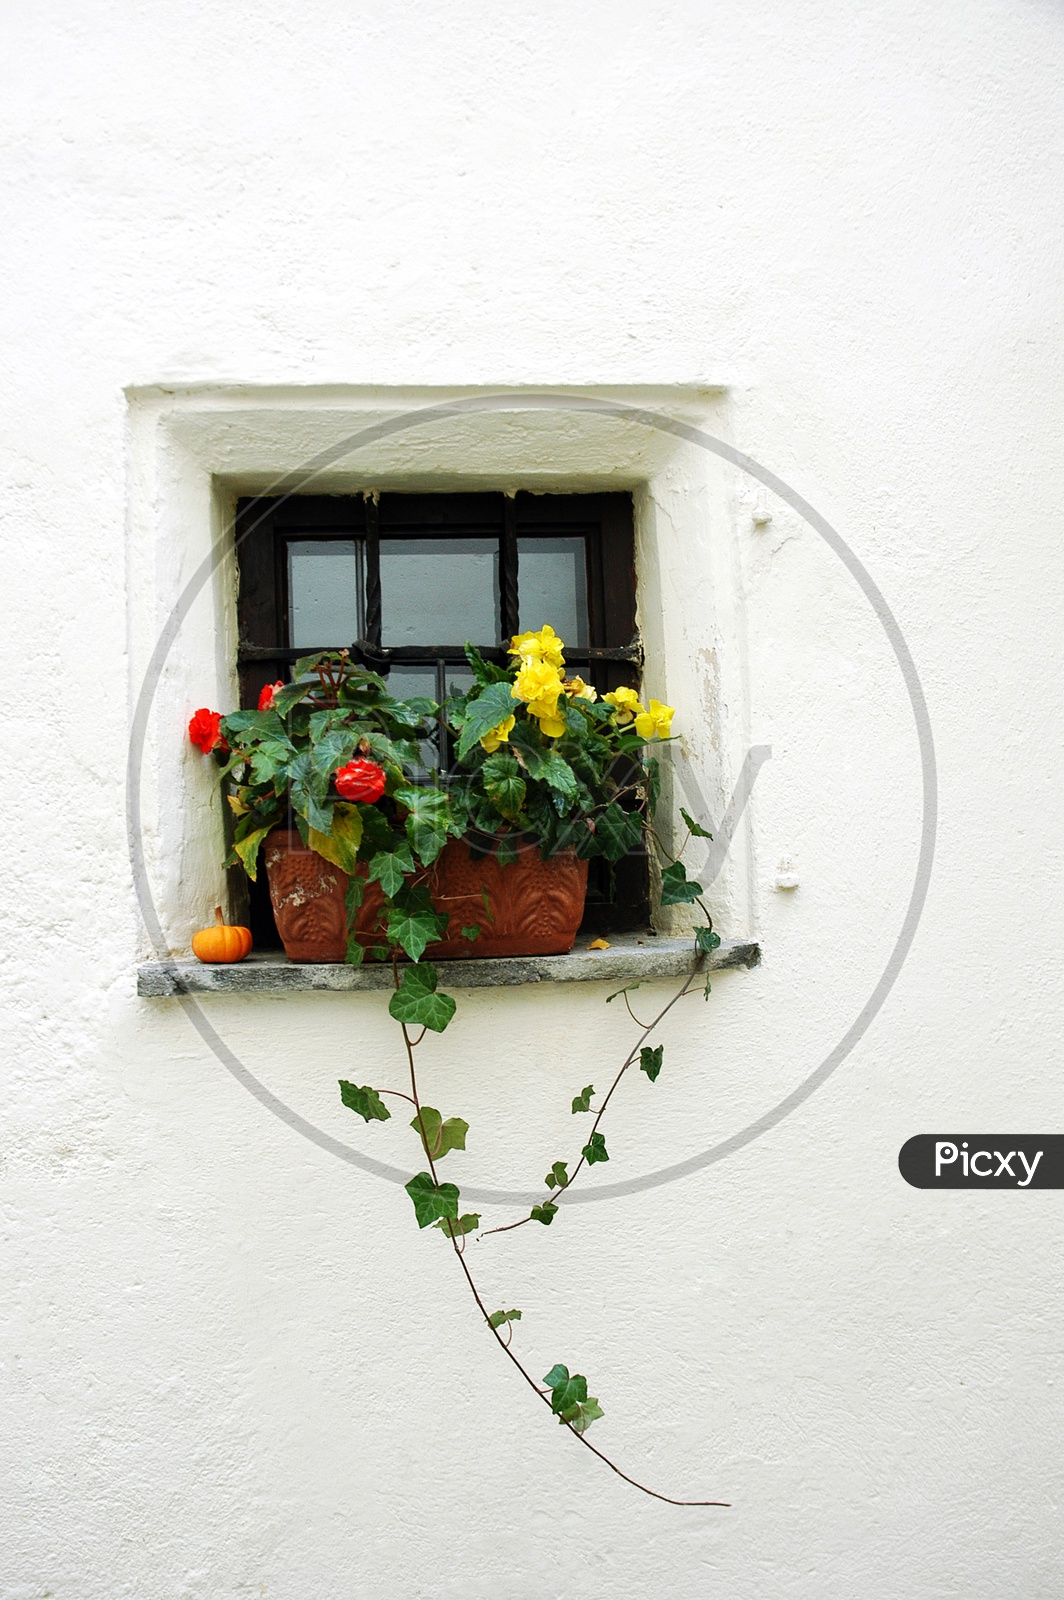 Colorful flower plants in a windowsill